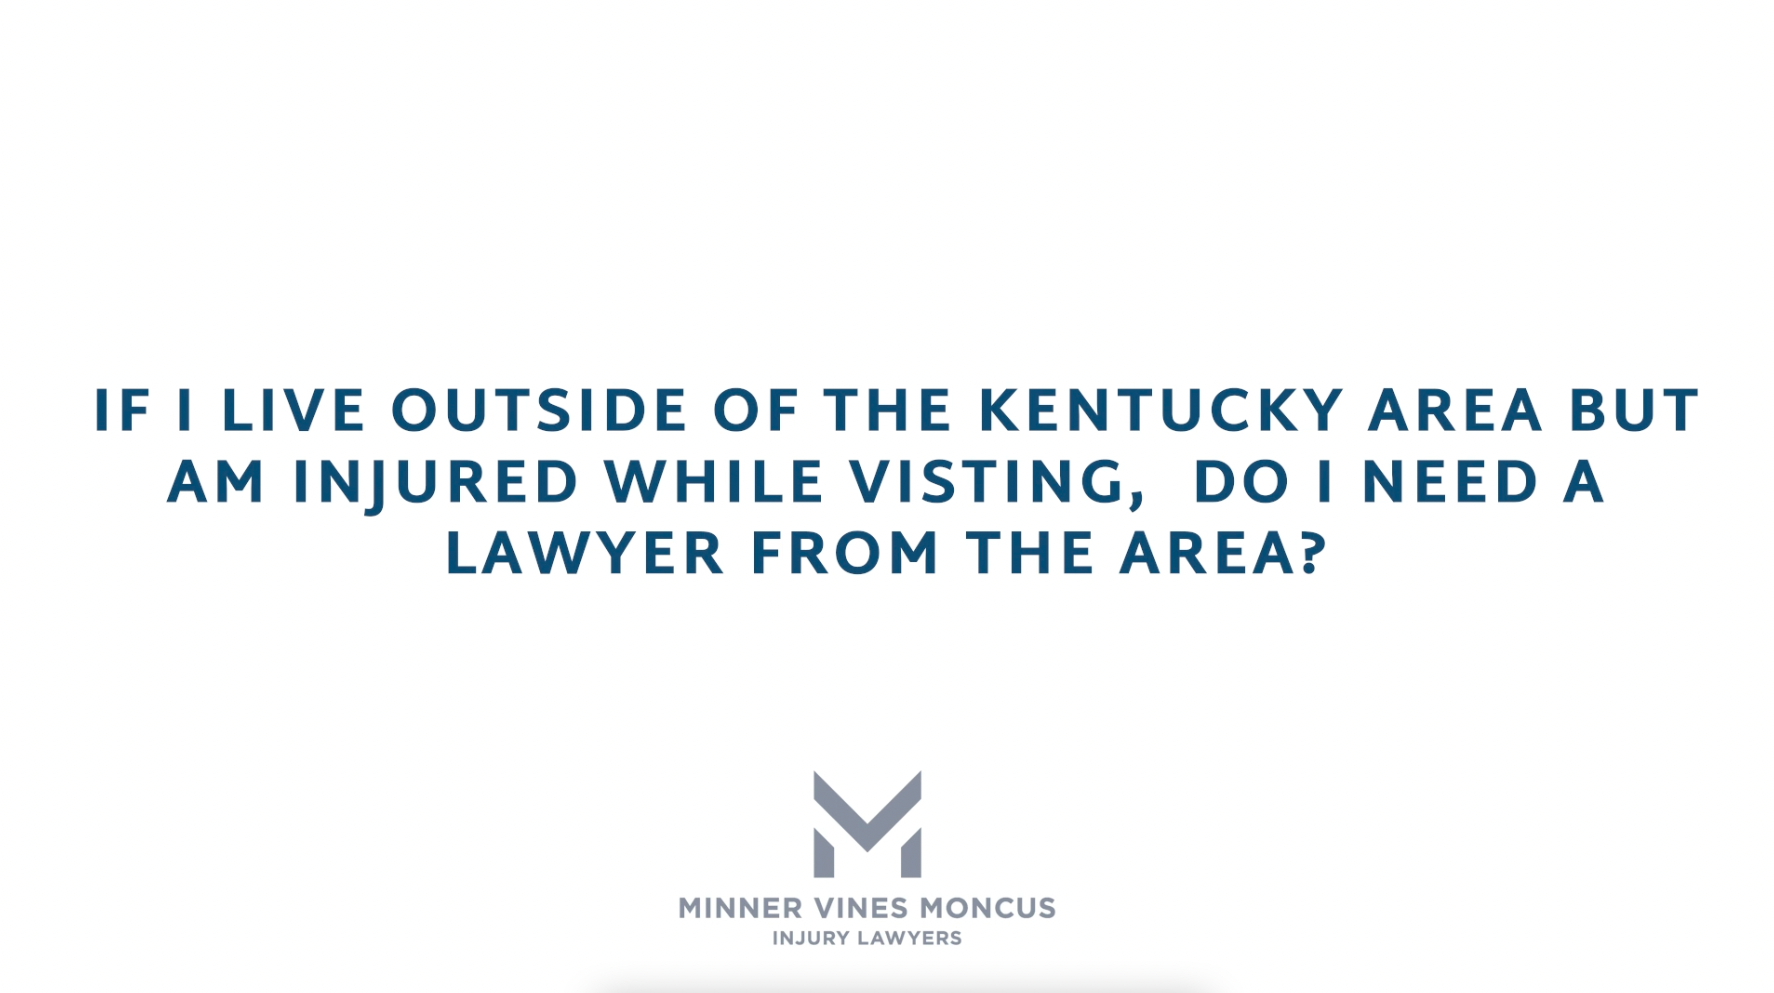 If I live outside of the Kentucky area but am injured while visiting, do I need a lawyer from the area?